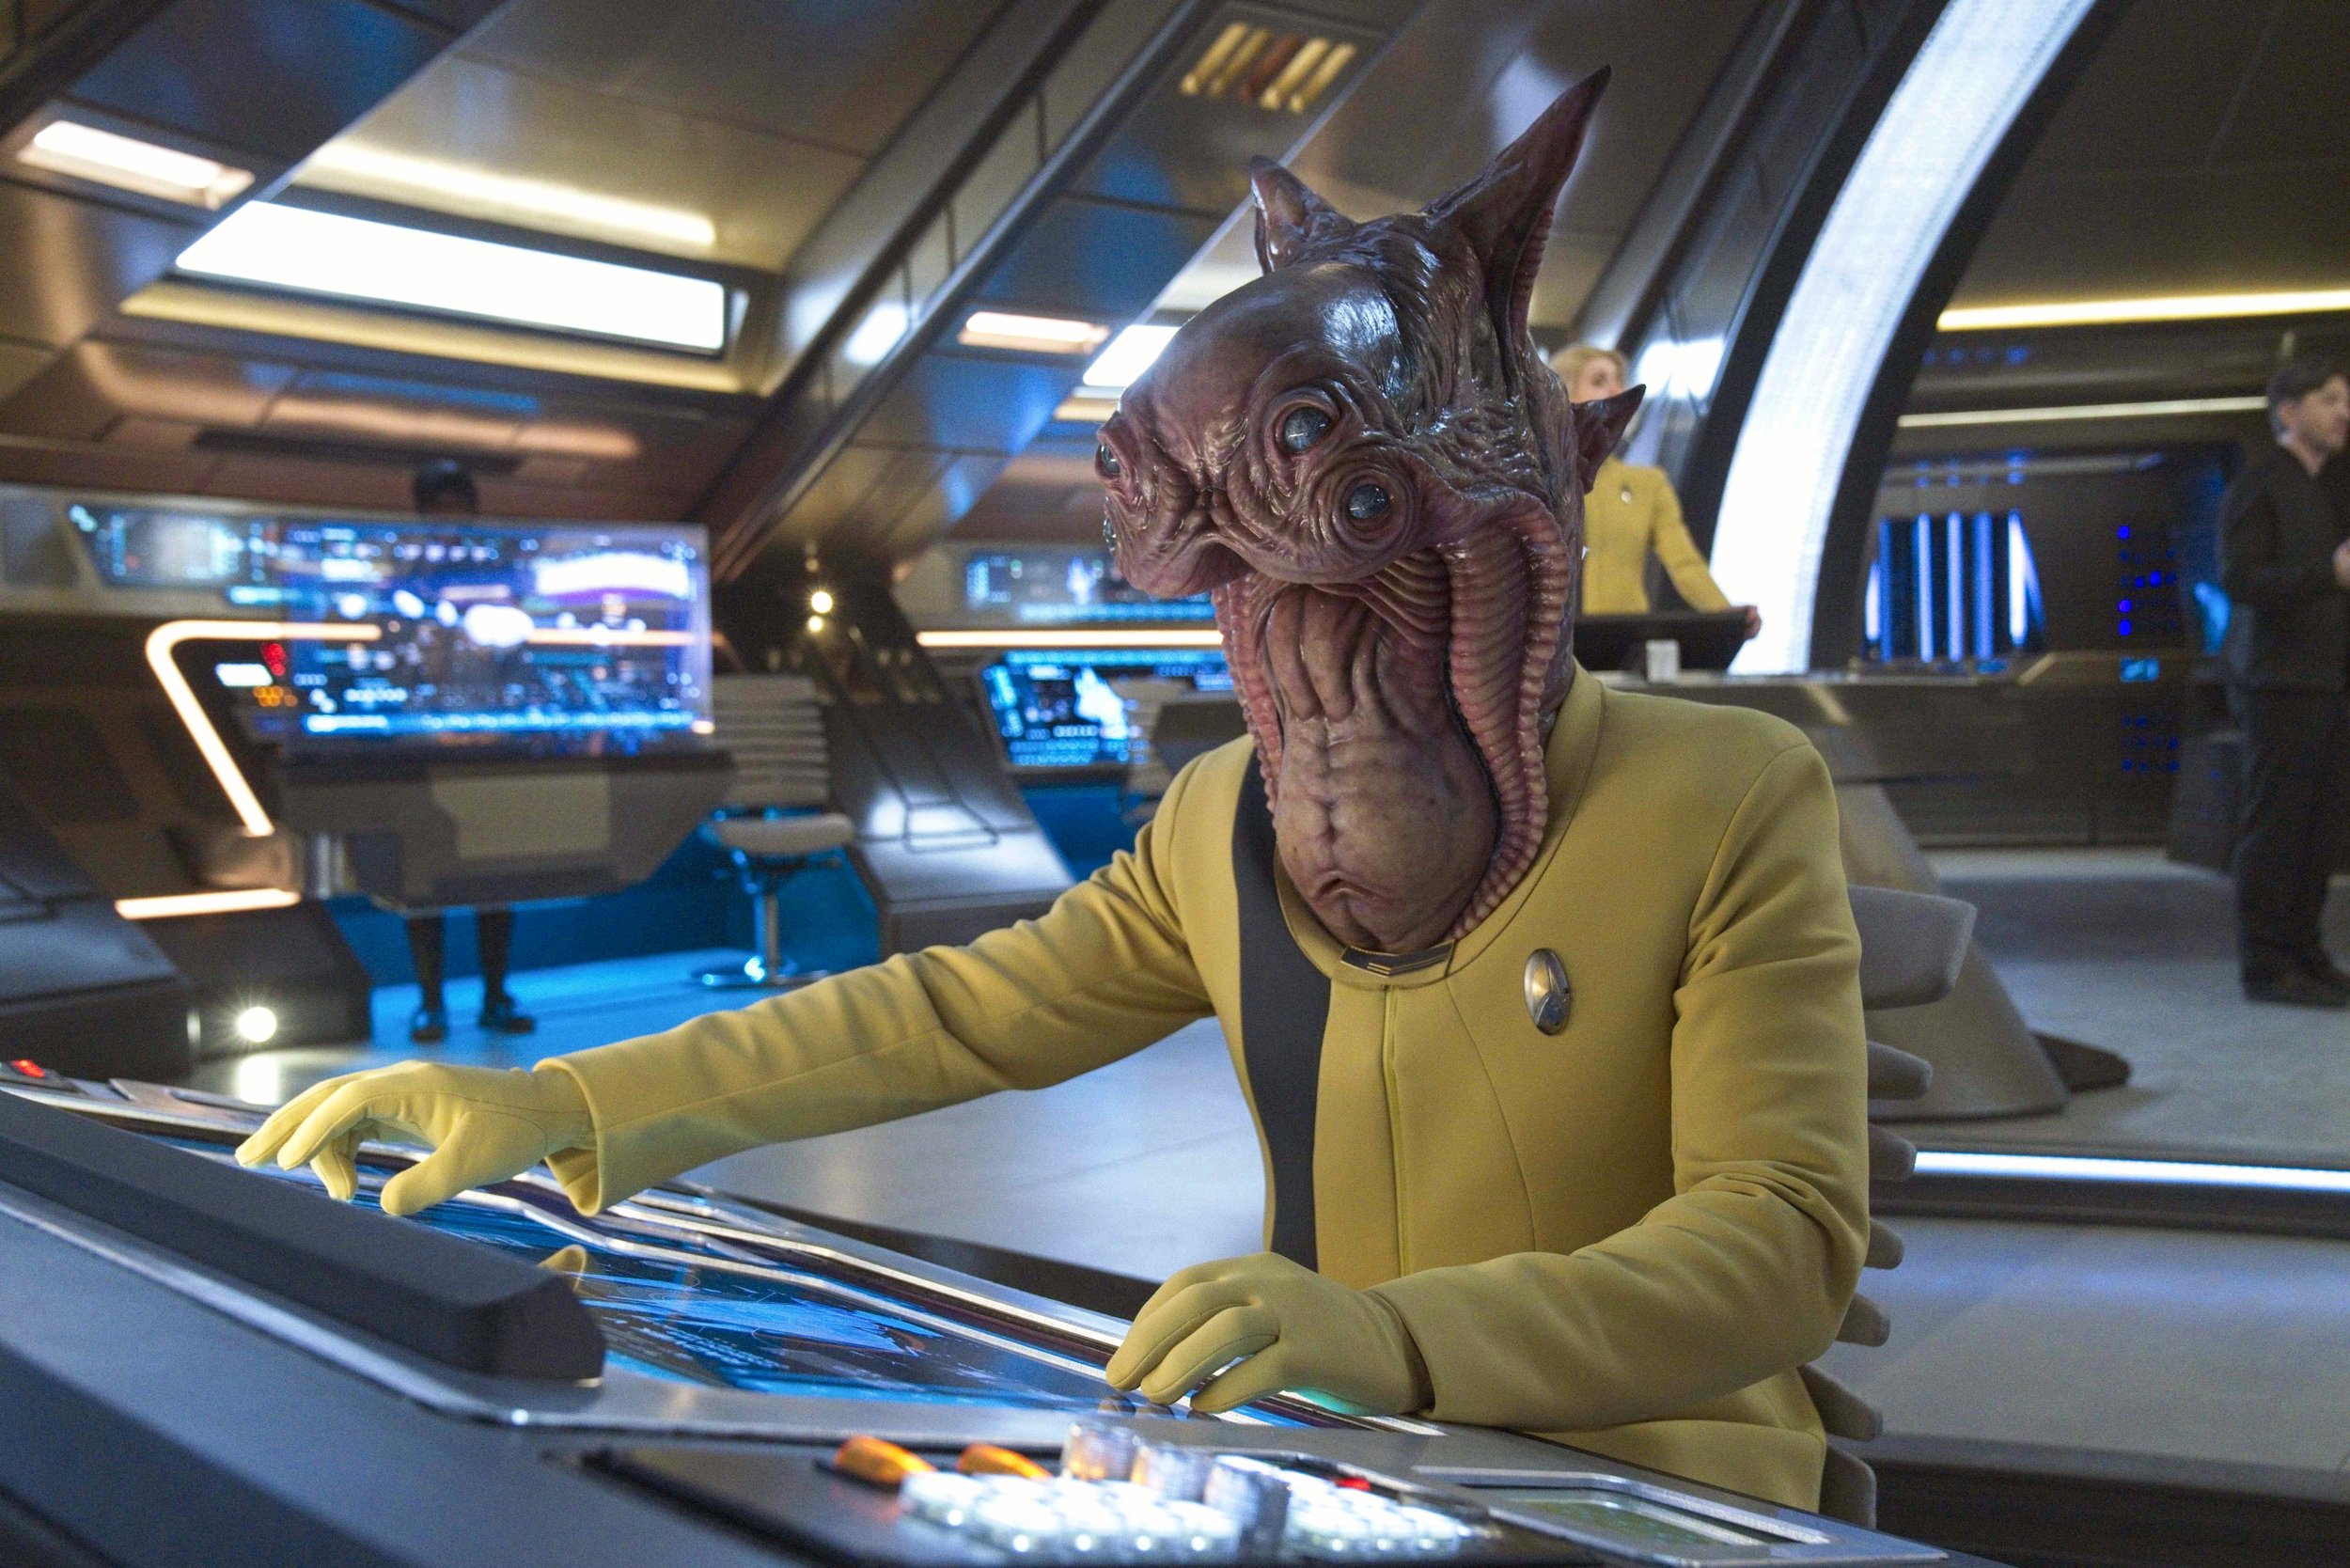   Pictured: Coverage of the Paramount+ original series STAR TREK: DISCOVERY. Photo Cr: Michael Gibson/Paramount+ (C) 2021 CBS Interactive. All Rights Reserved.  